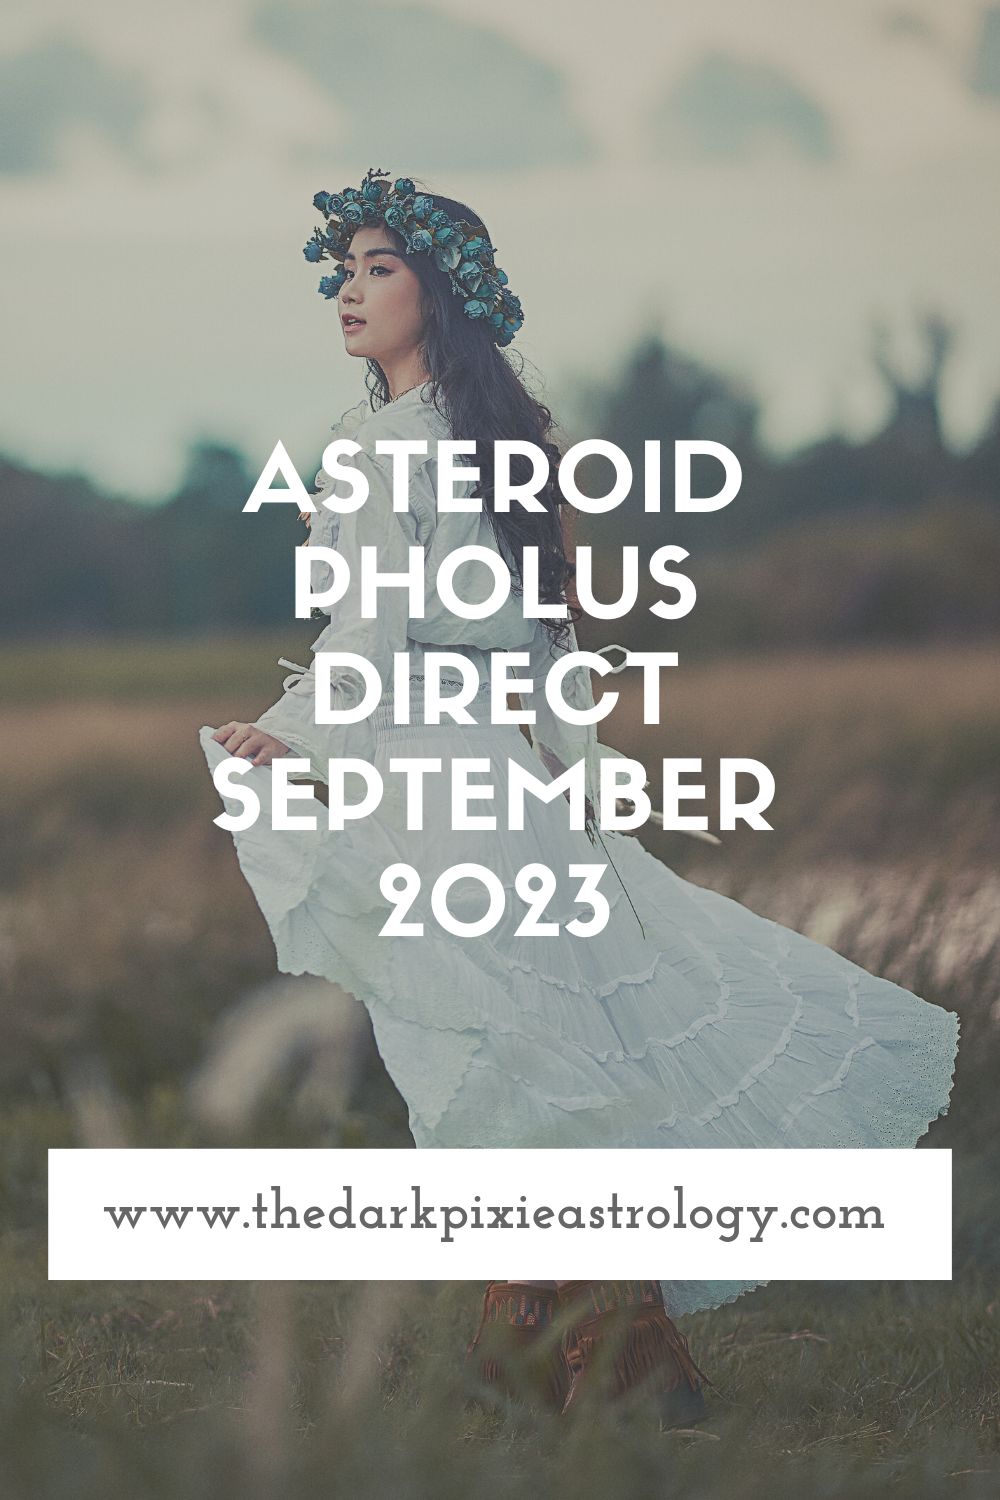 Asteroid Pholus Direct September 2023 - The Dark Pixie Astrology